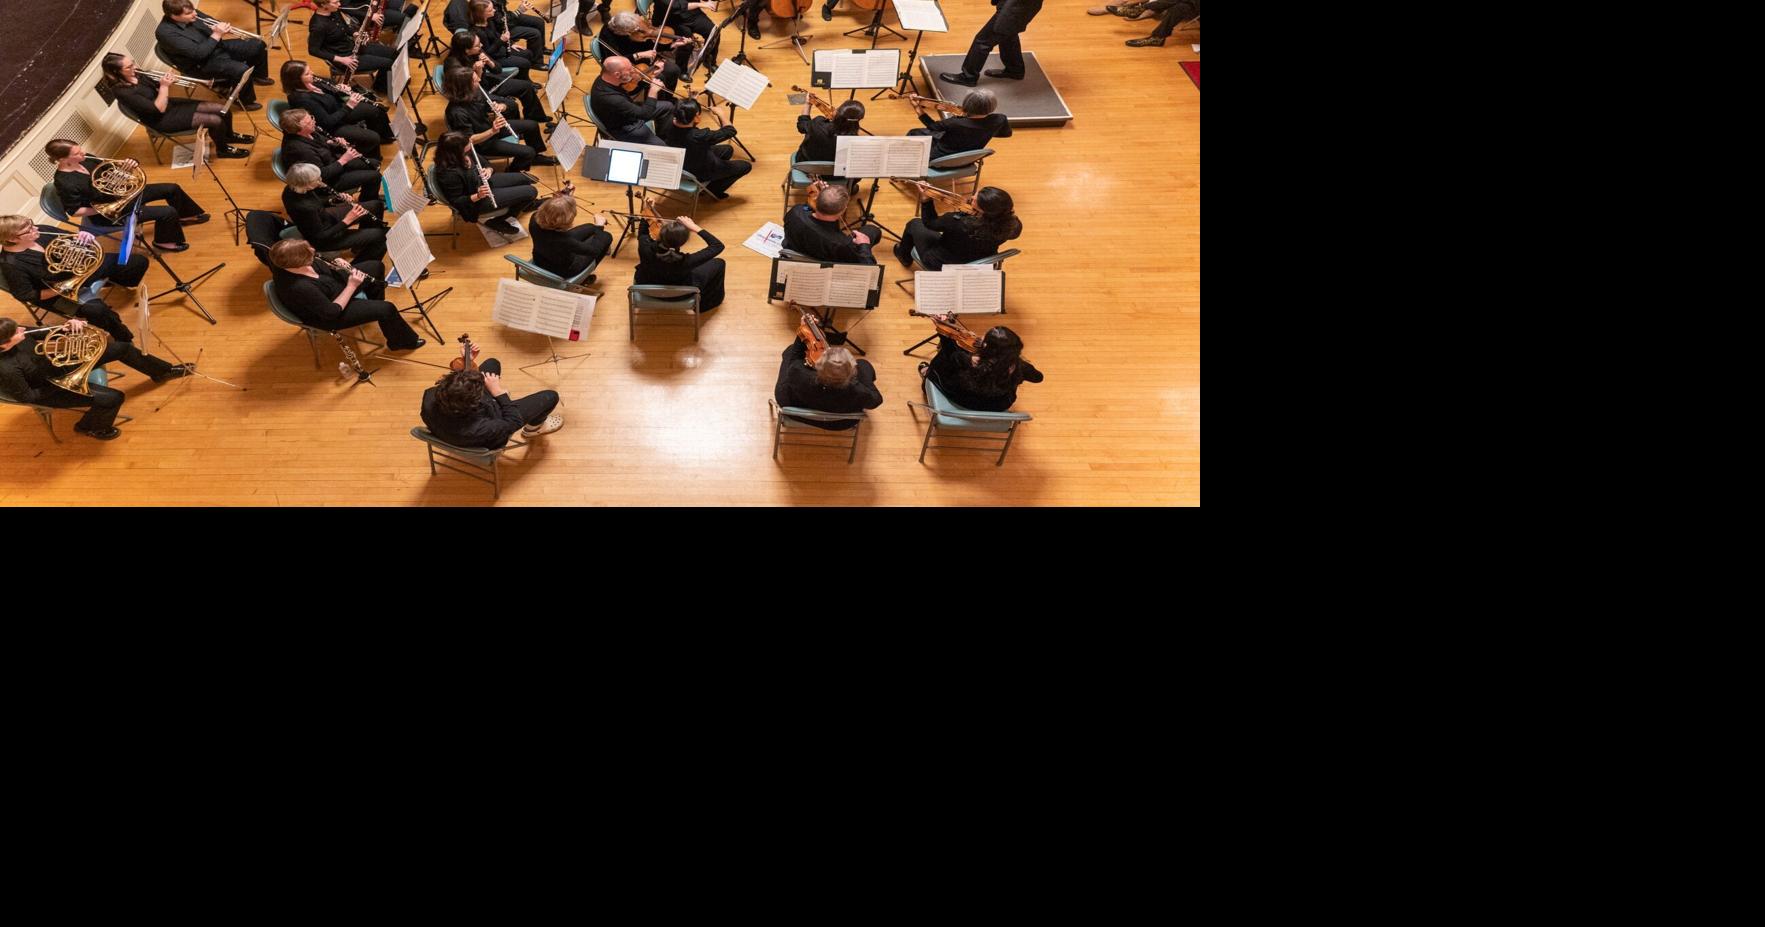 United Counseling Service to host Me2/Orchestra at Southern Vermont Arts Center